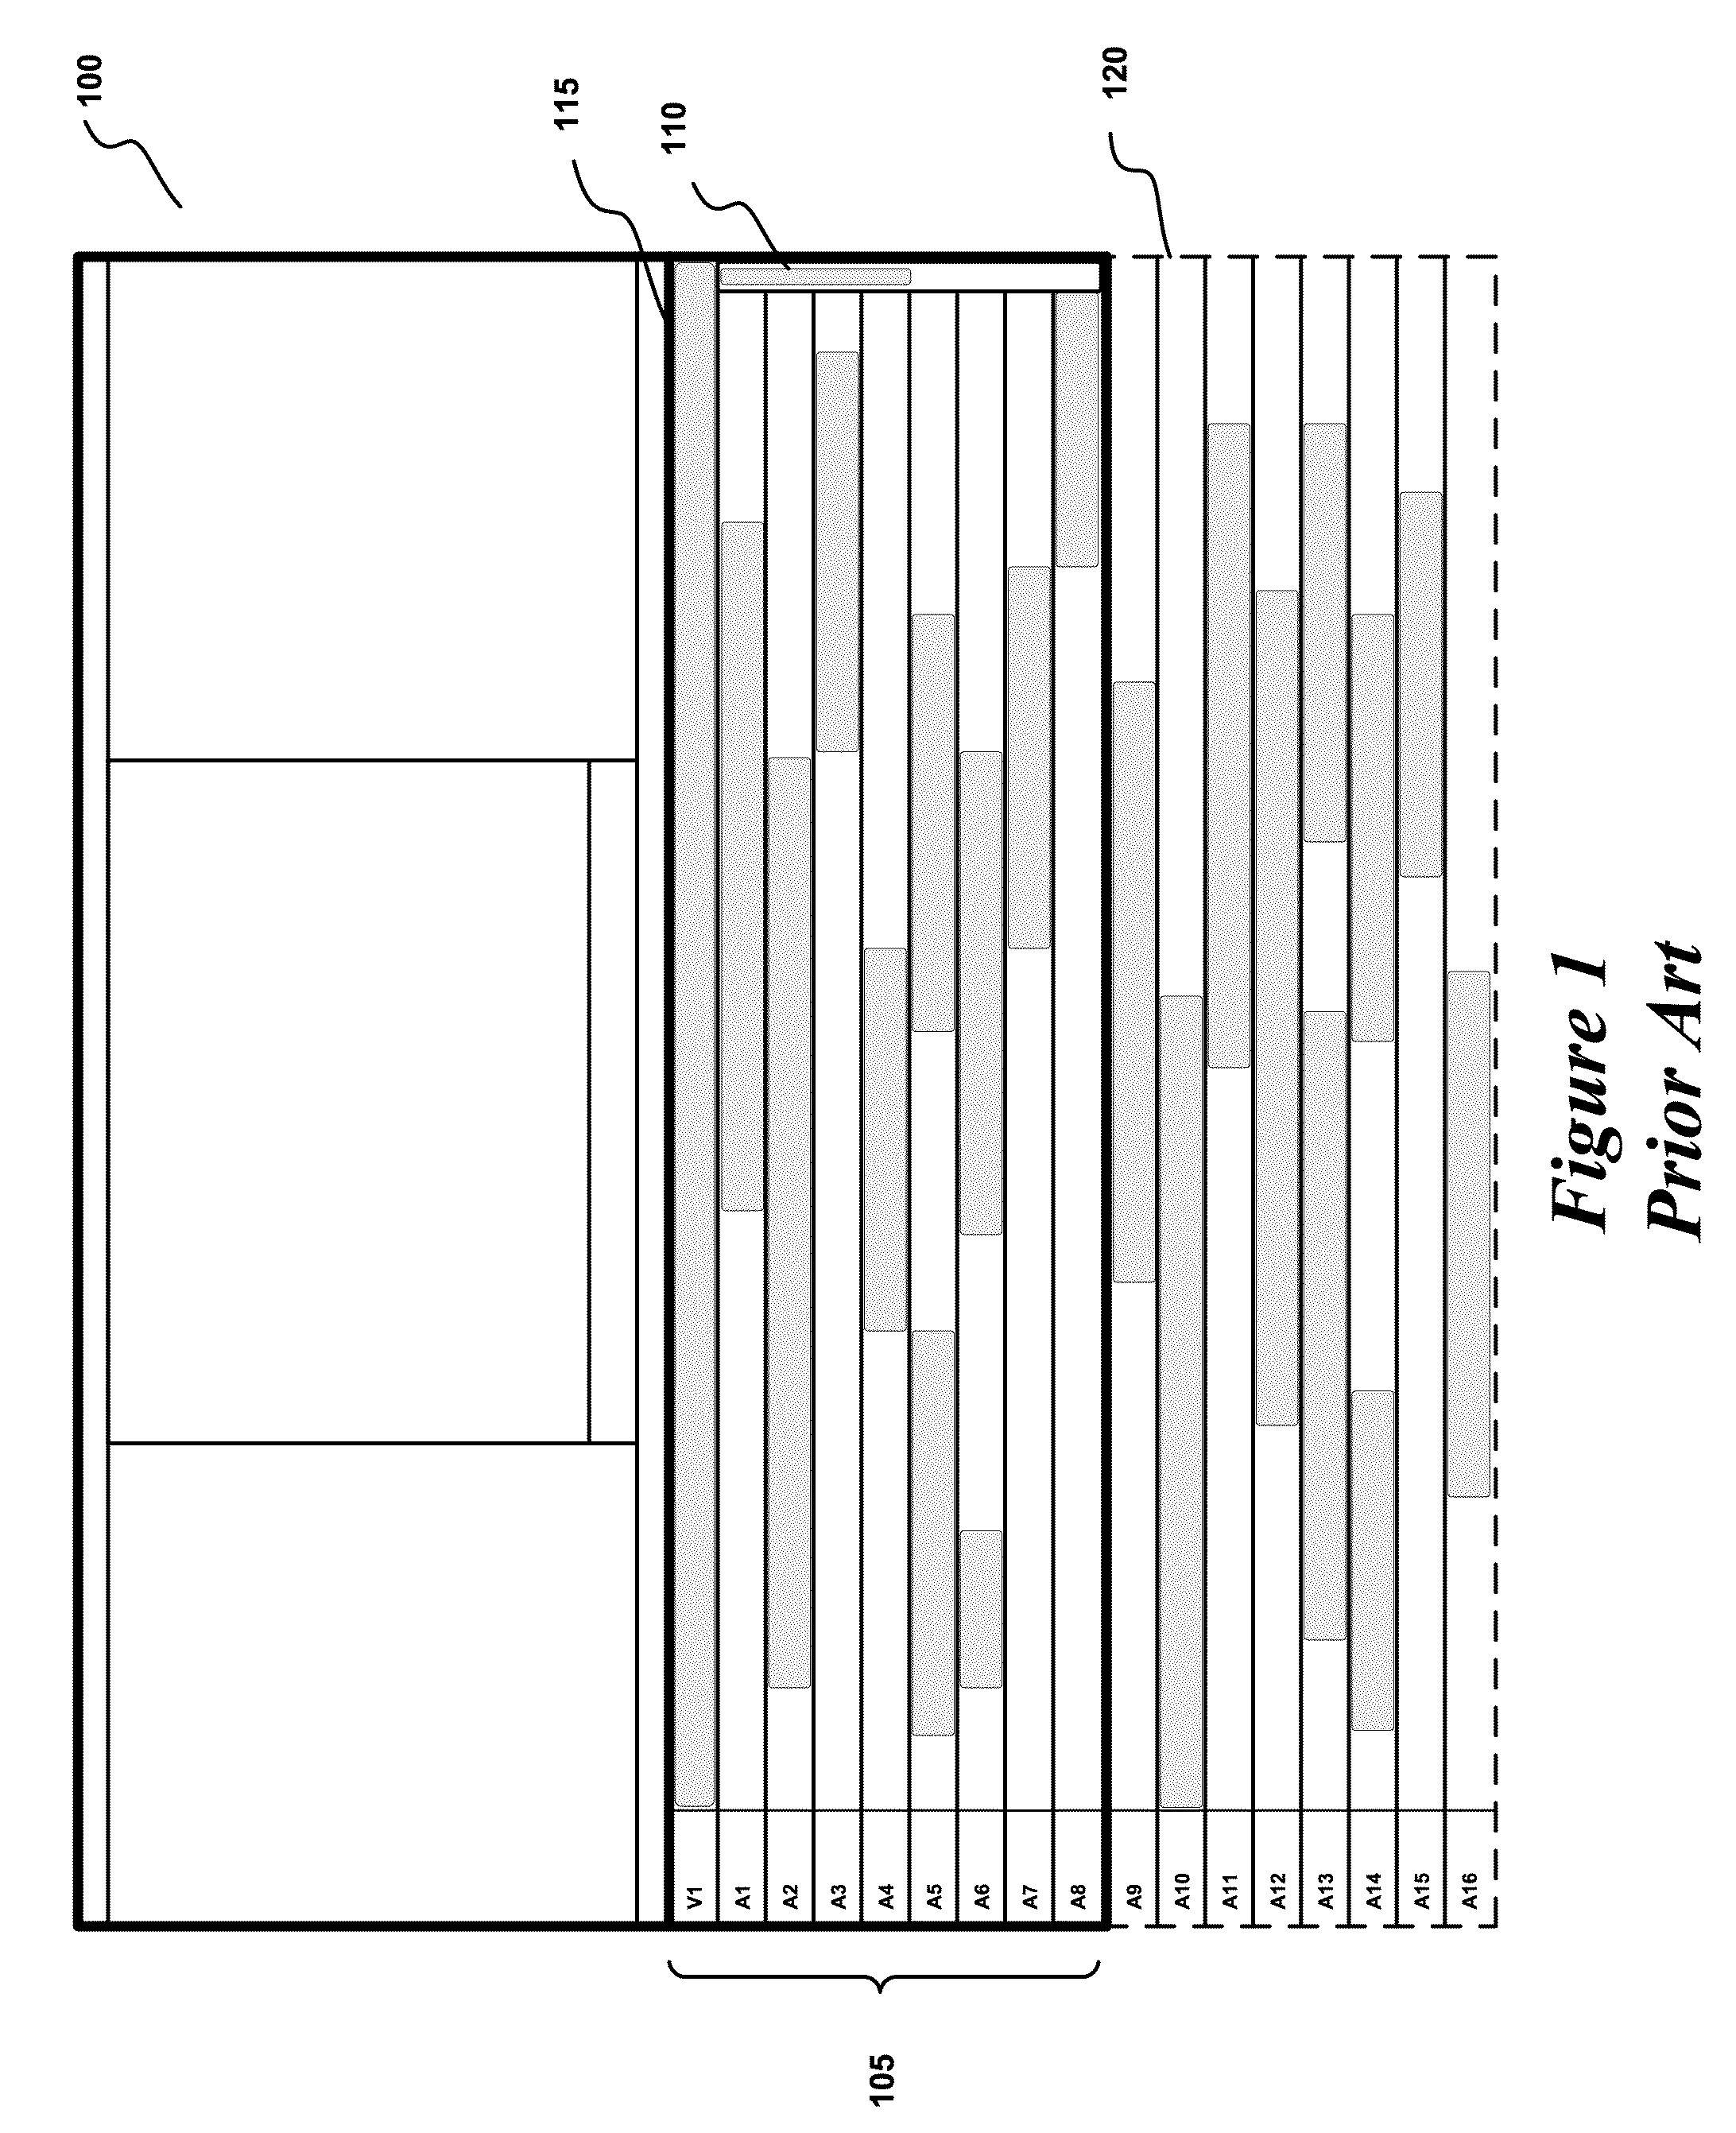 Media editing application with capability to focus on graphical composite elements in a media compositing area